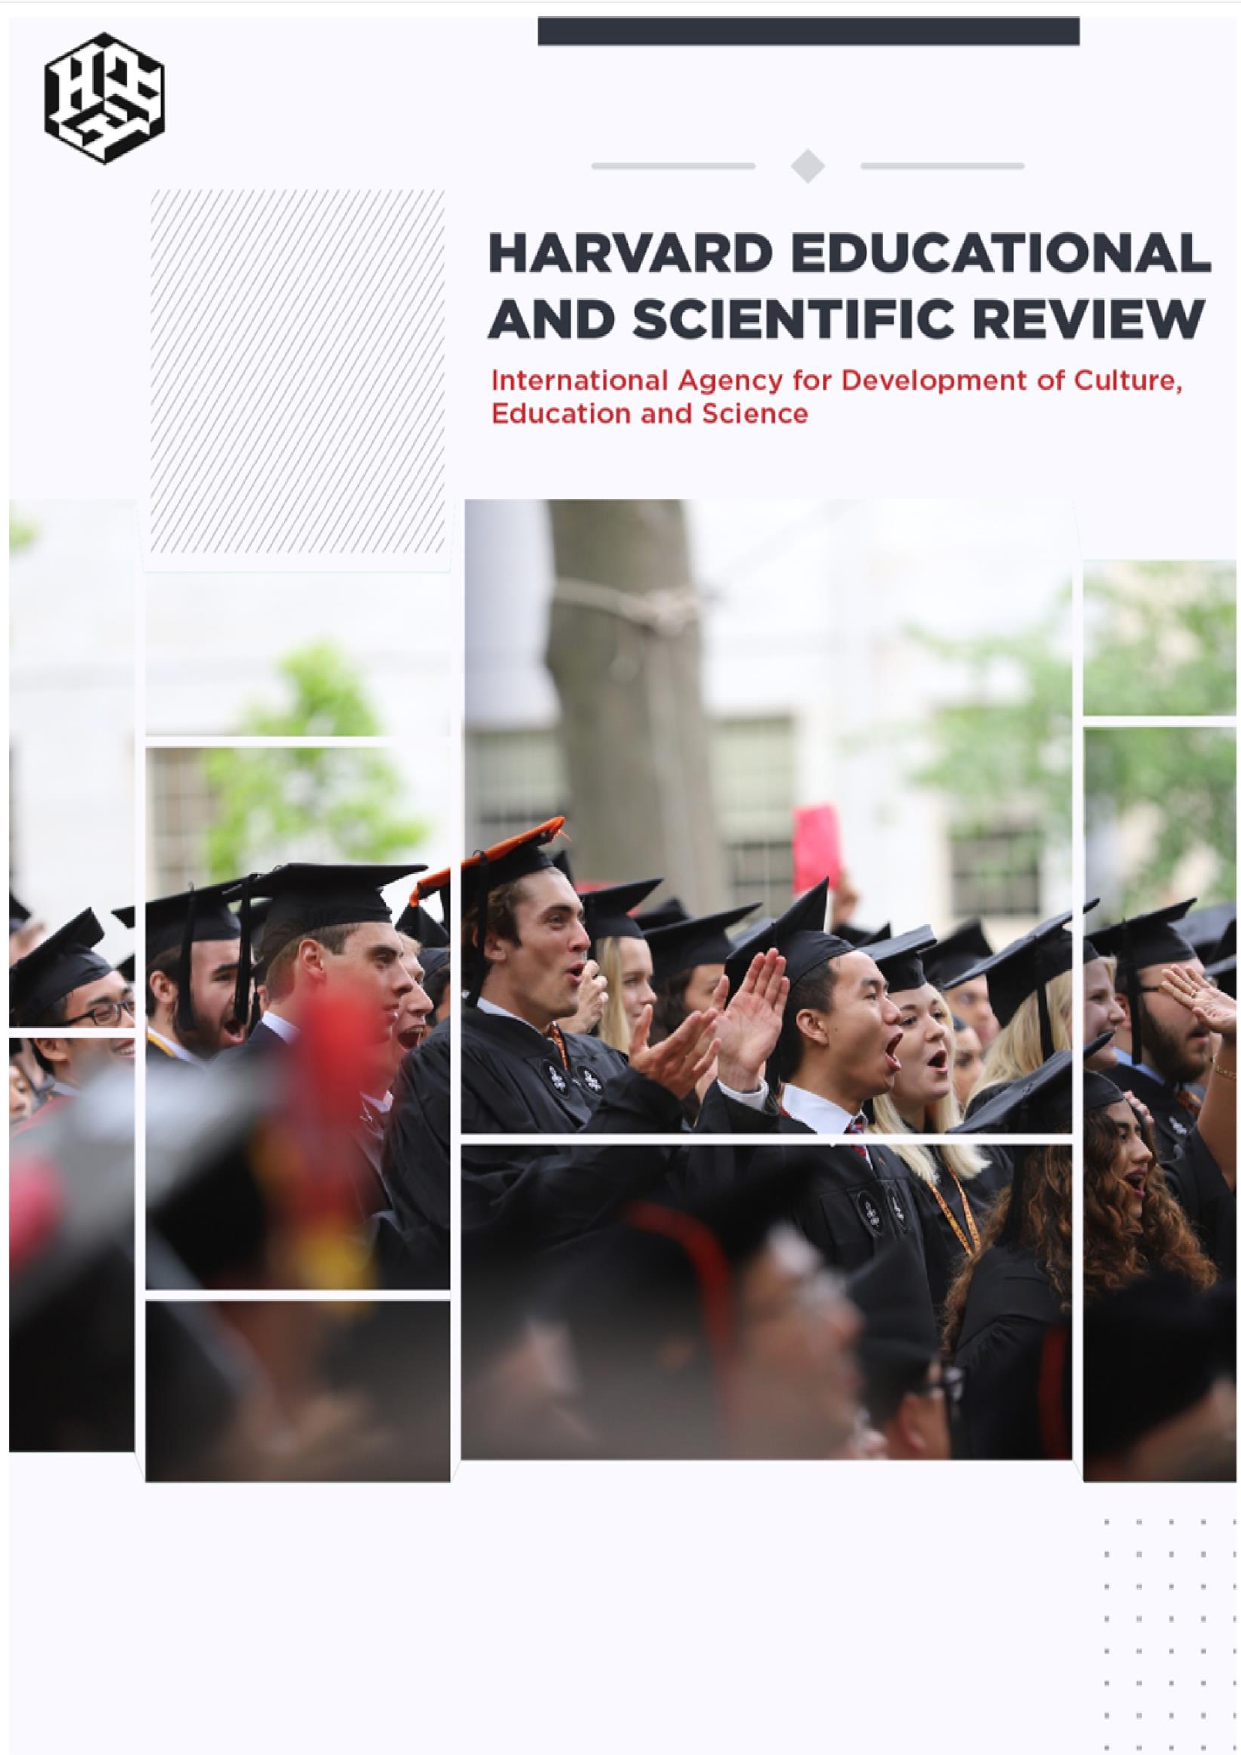 					View Vol. 1 No. 1 (2021): Harvard Educational and Scientific Review
				